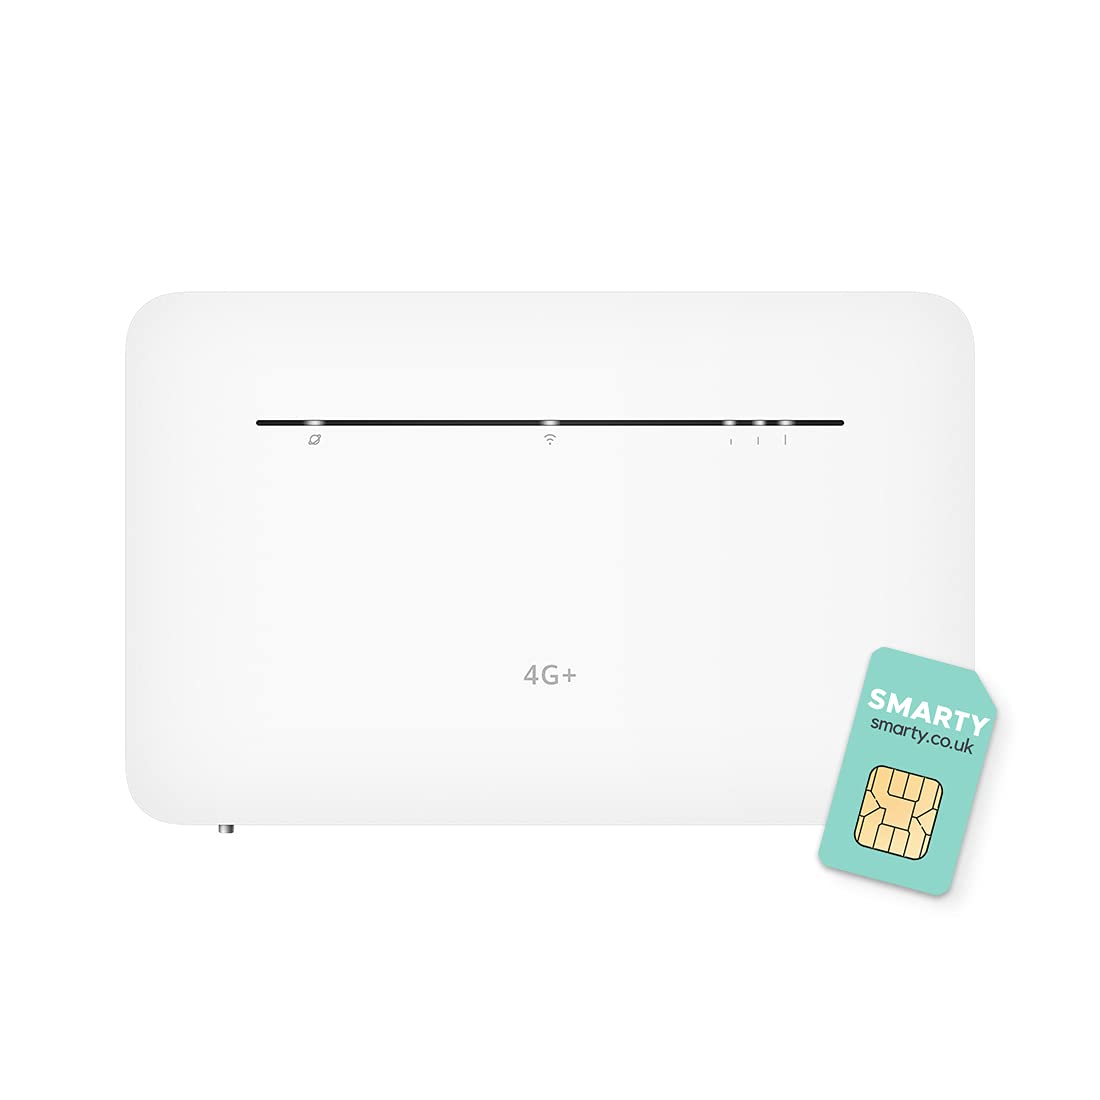 B535-333, 4G+ 400Mbps LTE CAT 7 Mobile WiFi wireless Router, Unlocked to All Networks -Genuine UK Warranty STOCK- (Non Network Logo) + FREE SMARTY Sim Card- White